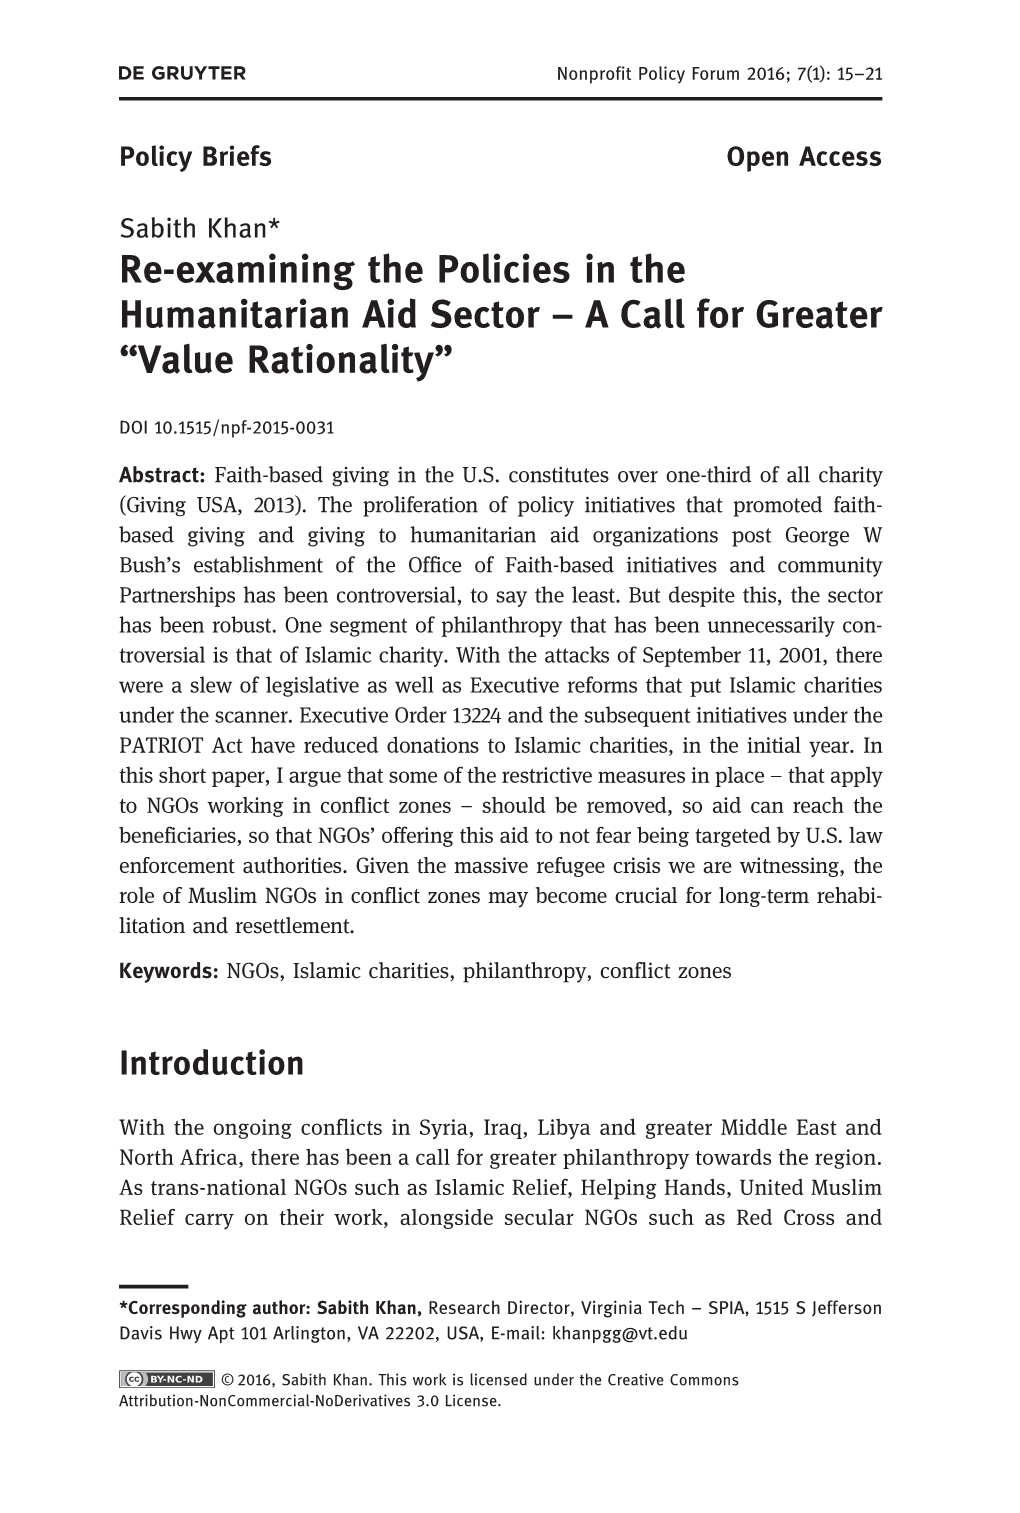 Re-Examining the Policies in the Humanitarian Aid Sector – a Call for Greater “Value Rationality”